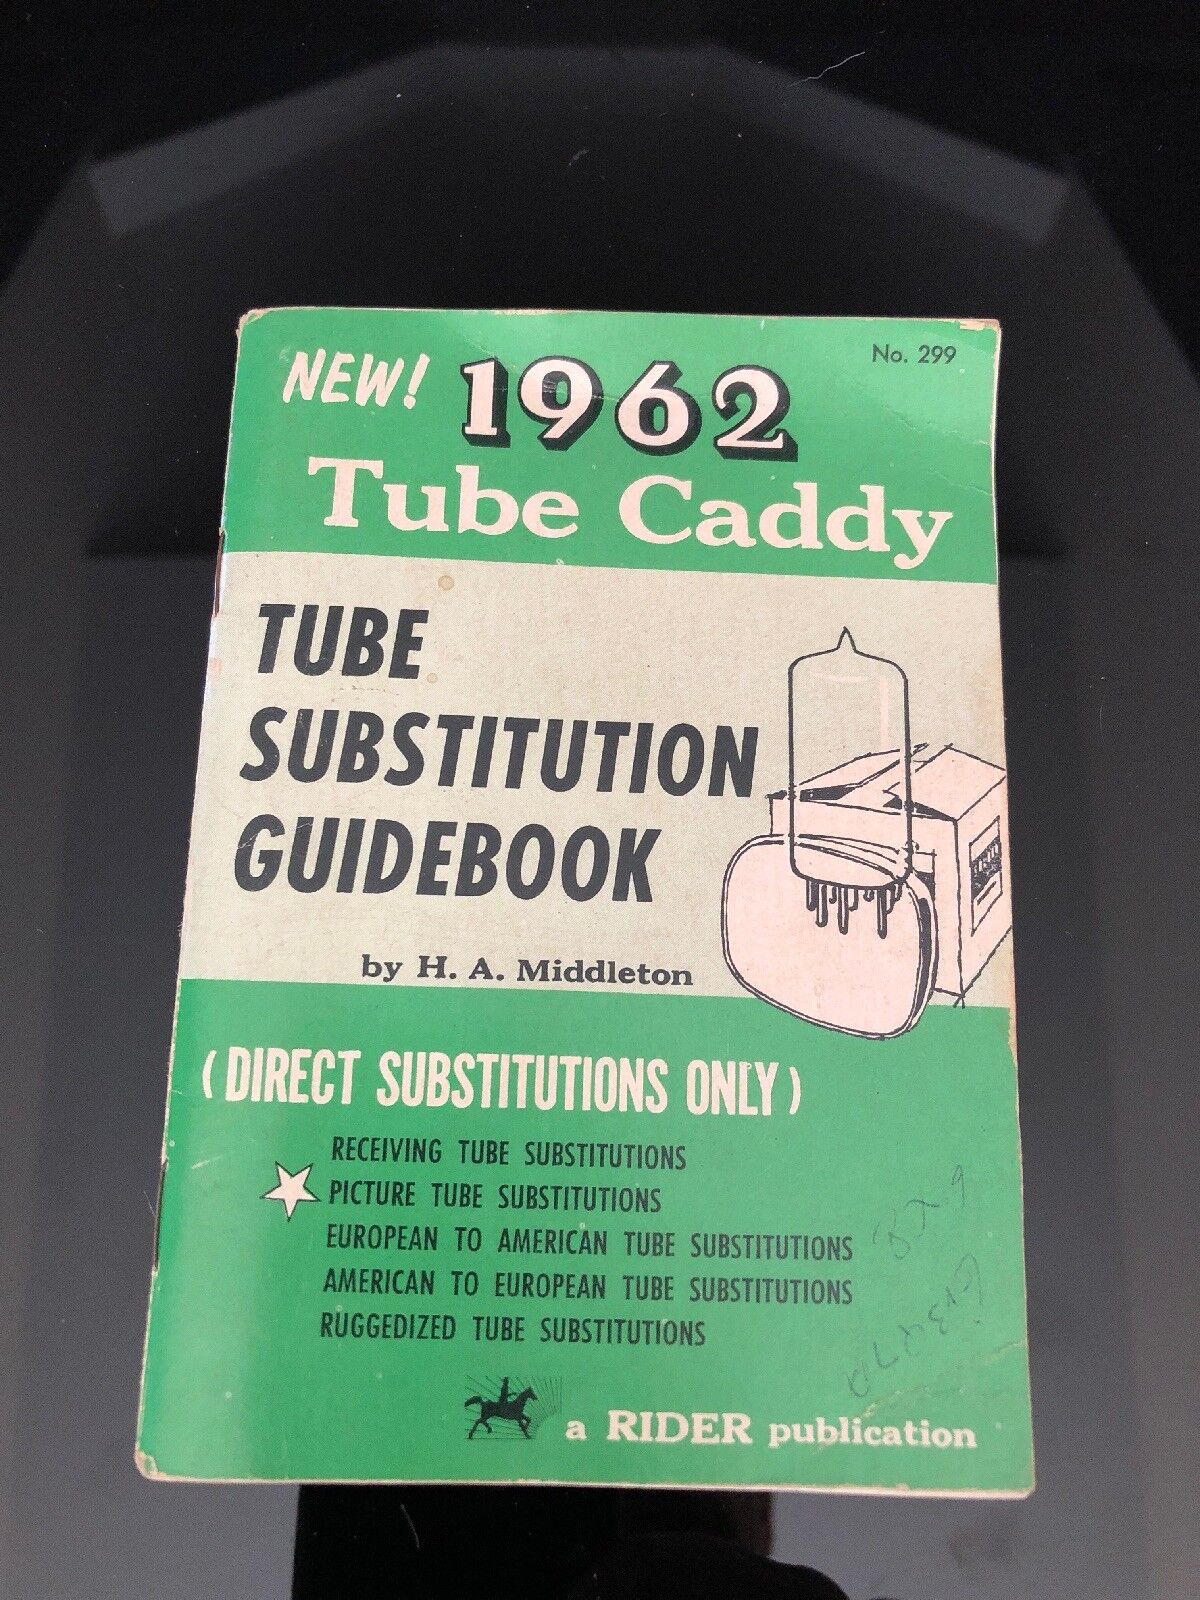 RARE 1962 Tube Caddy Tube Substitution Guidebook Rider Publications 